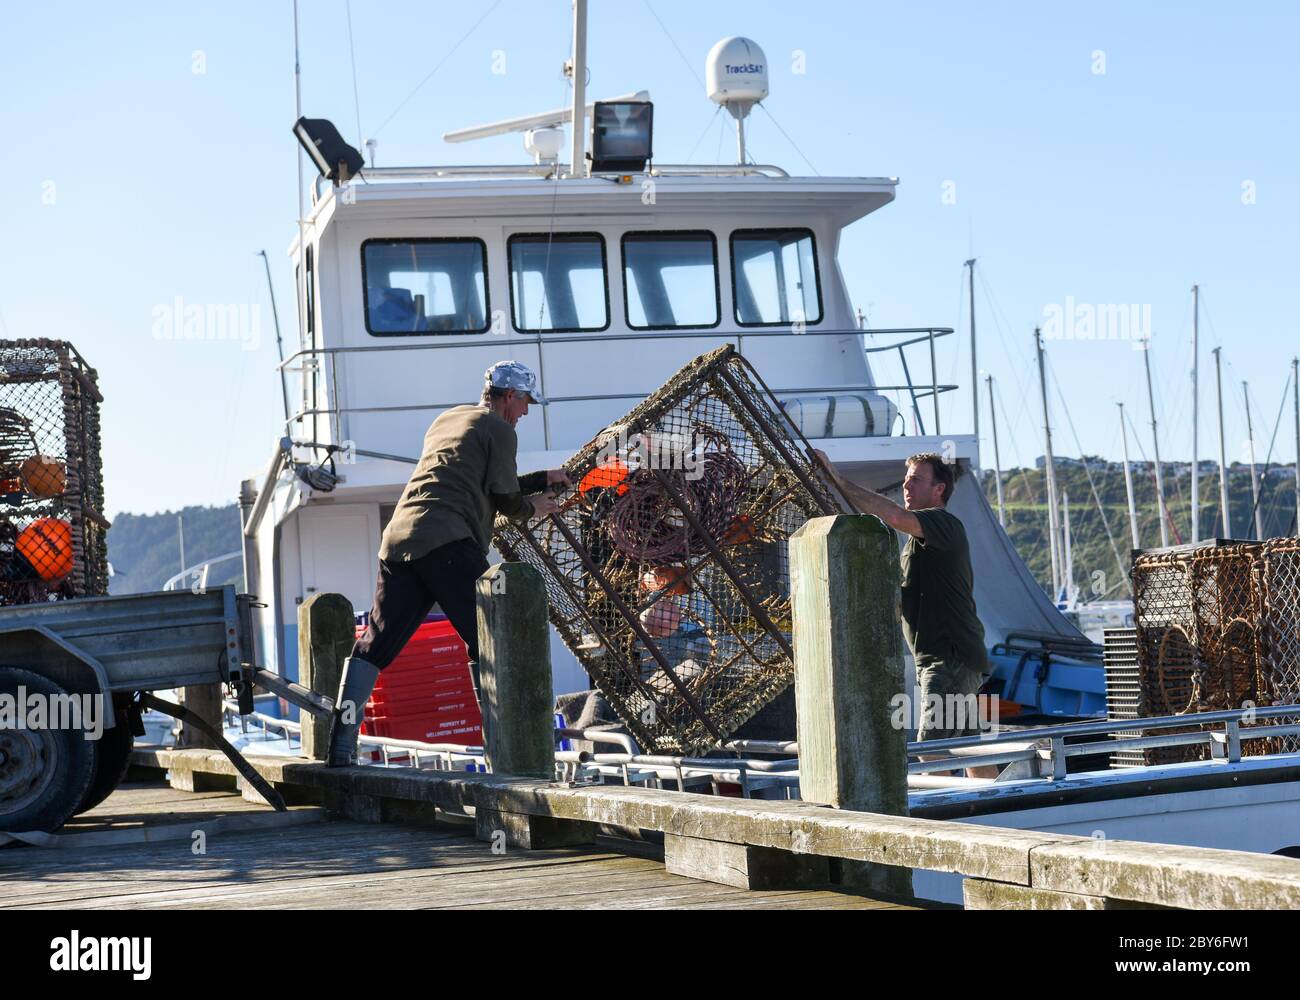 Wellington, New Zealand. 9th June, 2020. Fishermen make preparations in Wellington, New Zealand, June 9, 2020. The Ministry of Health reported no cases of COVID-19 in New Zealand on Tuesday, the first day of epidemic Alert Level 1, 18 days since the last new case was reported in the country. Credit: Guo Lei/Xinhua/Alamy Live News Stock Photo